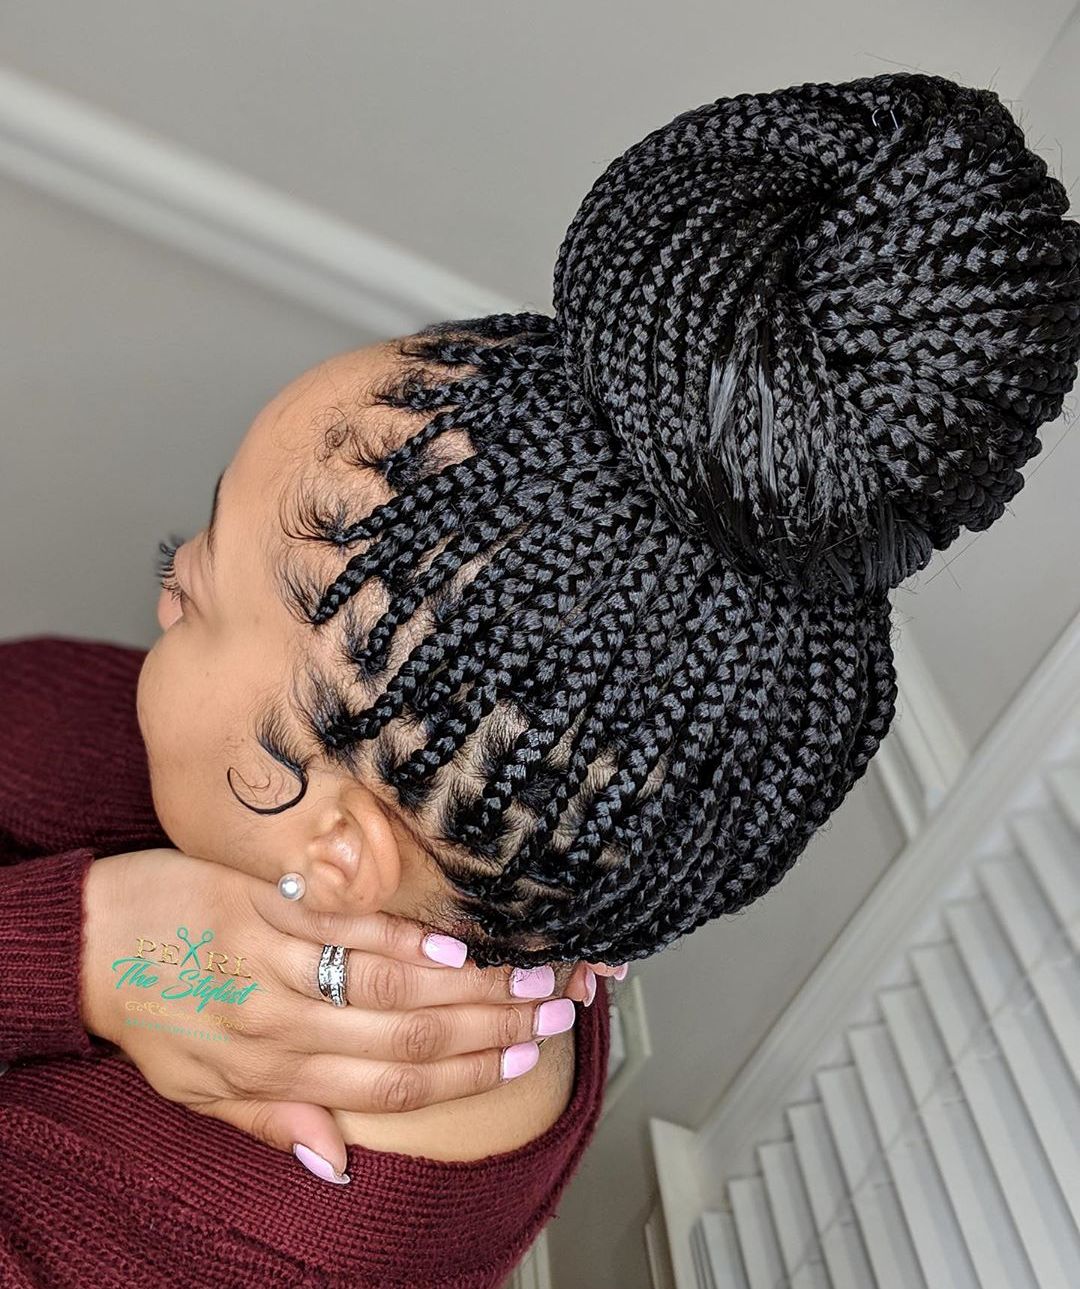 50 Cool Box Braids Hairstyles for Women  African braids hairstyles,  Braided hairstyles for black women, Braids for black hair